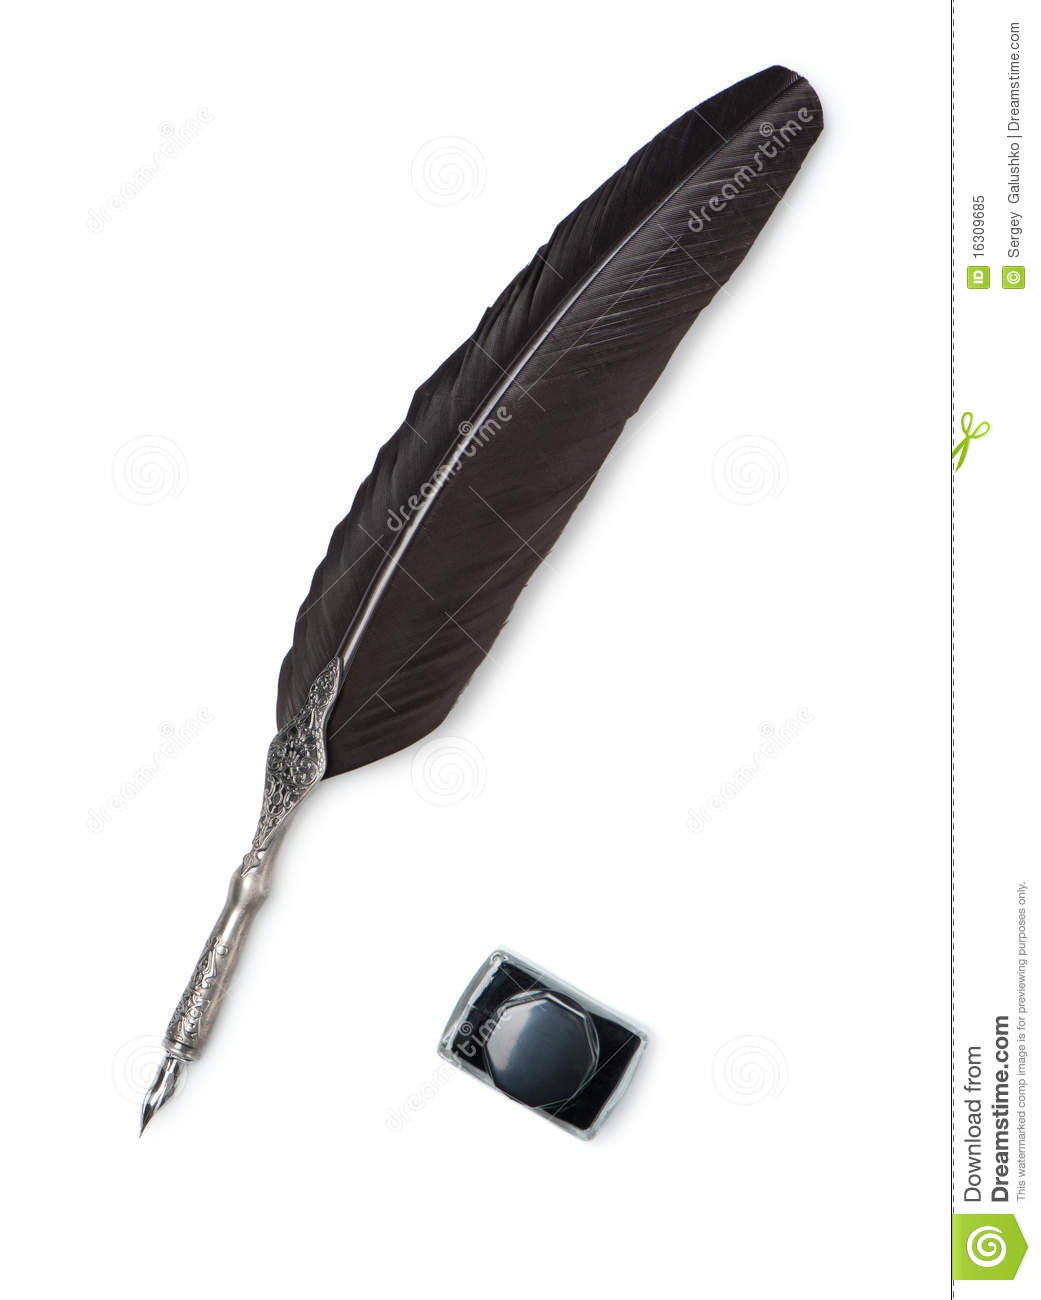 Feather Quill And Inkwell Royalty Free Stock Photo   Image  16309685